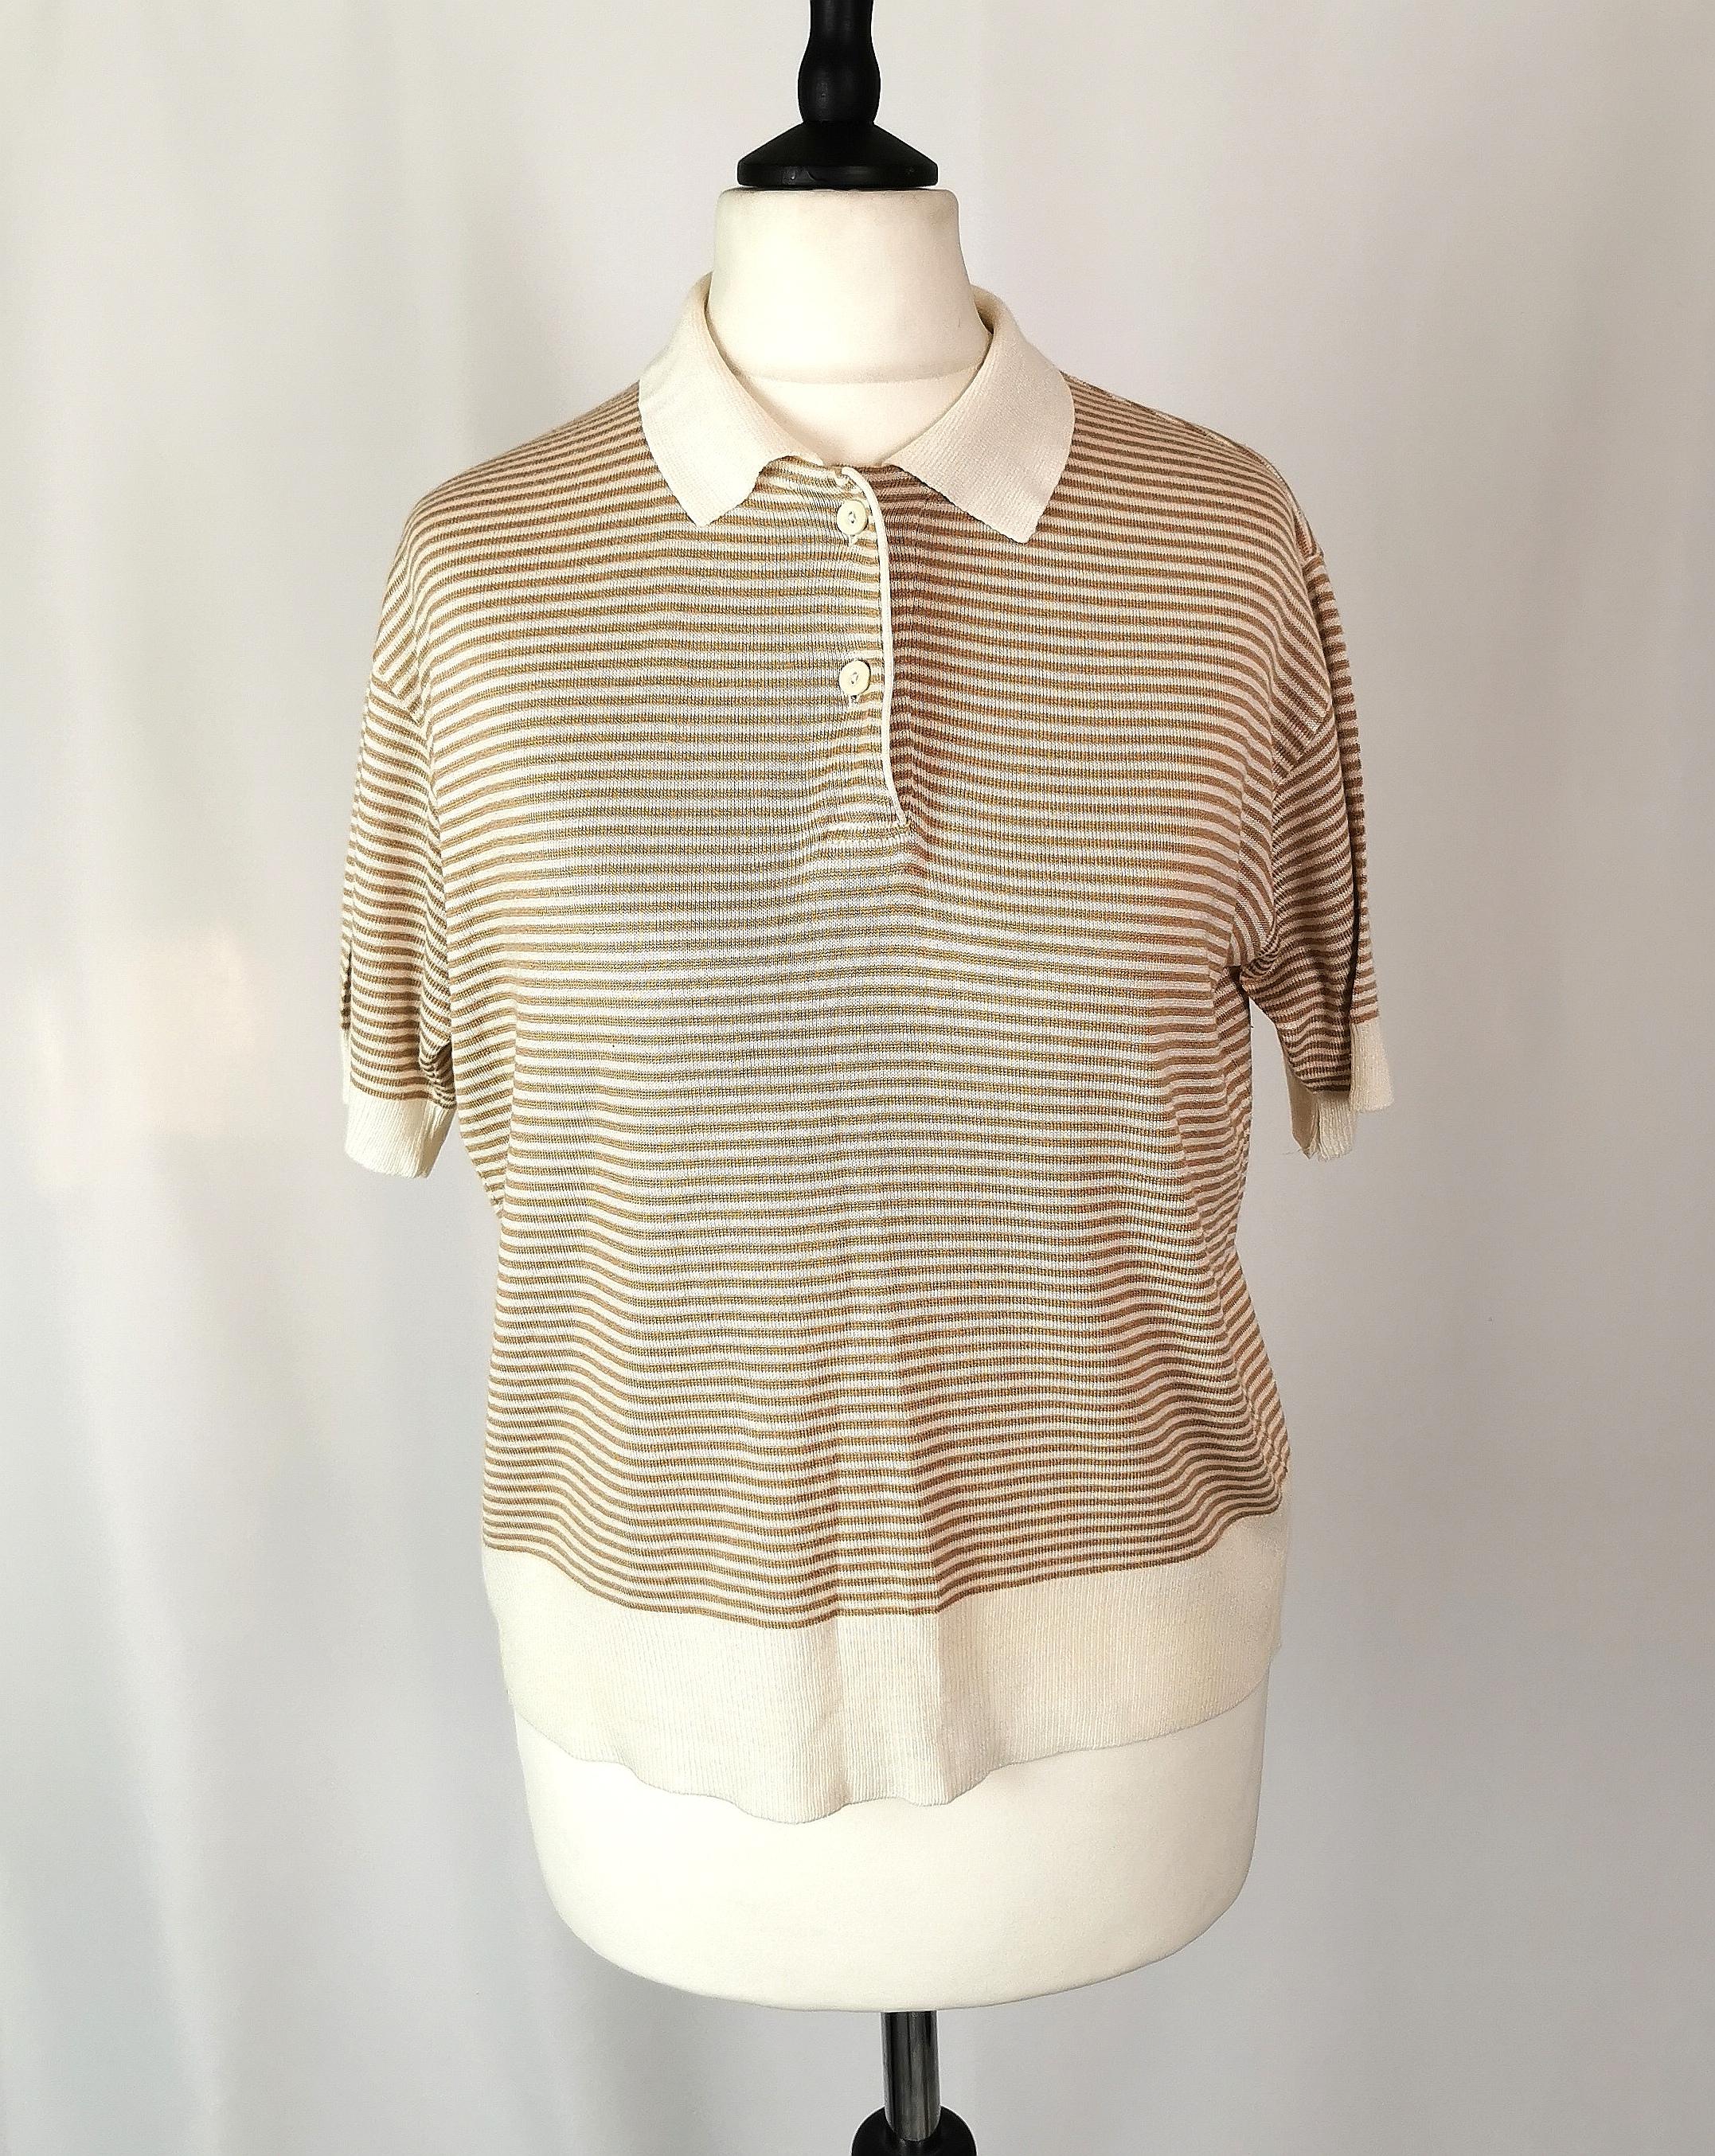 An original preppy favourite by Escada.

Vintage Escada ladies soft knit polo shirt / top.

Warm beige and soft cream stripe with a knitted waistband, cuffs and collar, the top buttons up at the neck just like a traditional polo shirt.

It is